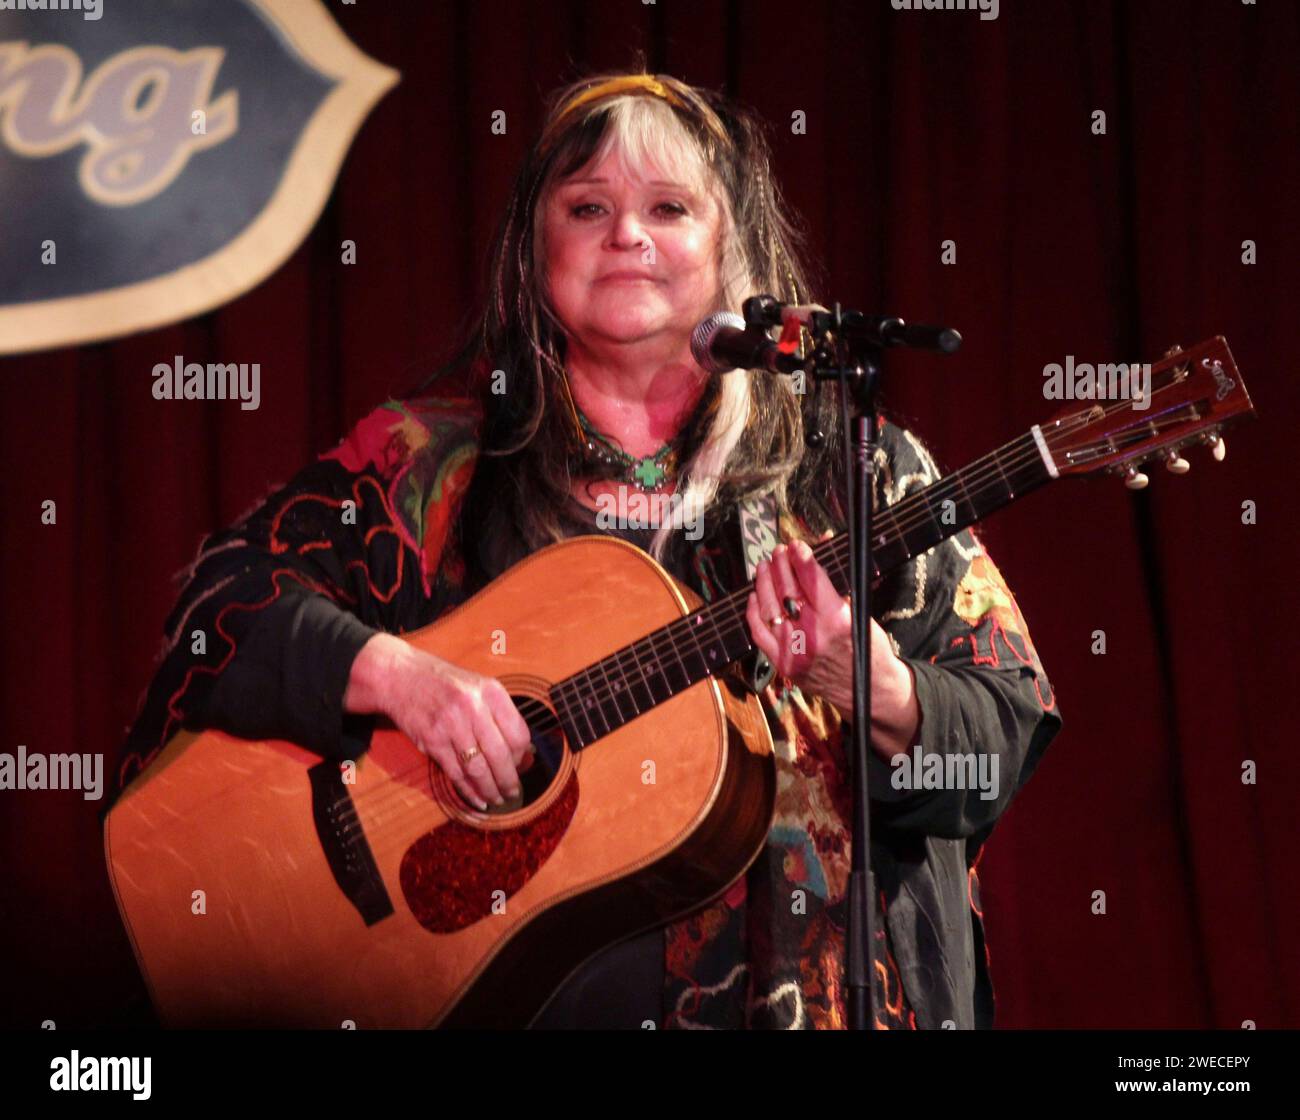 **FILE PHOTO** Melanie Has Passed Away.  Singer-songwriter Melanie Safka-Schekeryk, known professionally as simply Melanie who is best known for her hits from the late 60's and early 70's like 'Brand New Key,' 'Lay Down (Candles in the Rain),' 'Ruby Tuesday,' and 'What Have They Done to My Song Ma' performed at B.B. King Blues Club & Grill in New York City on April 7, 2012.  Photo Credit: Henry McGee/MediaPunch Stock Photo